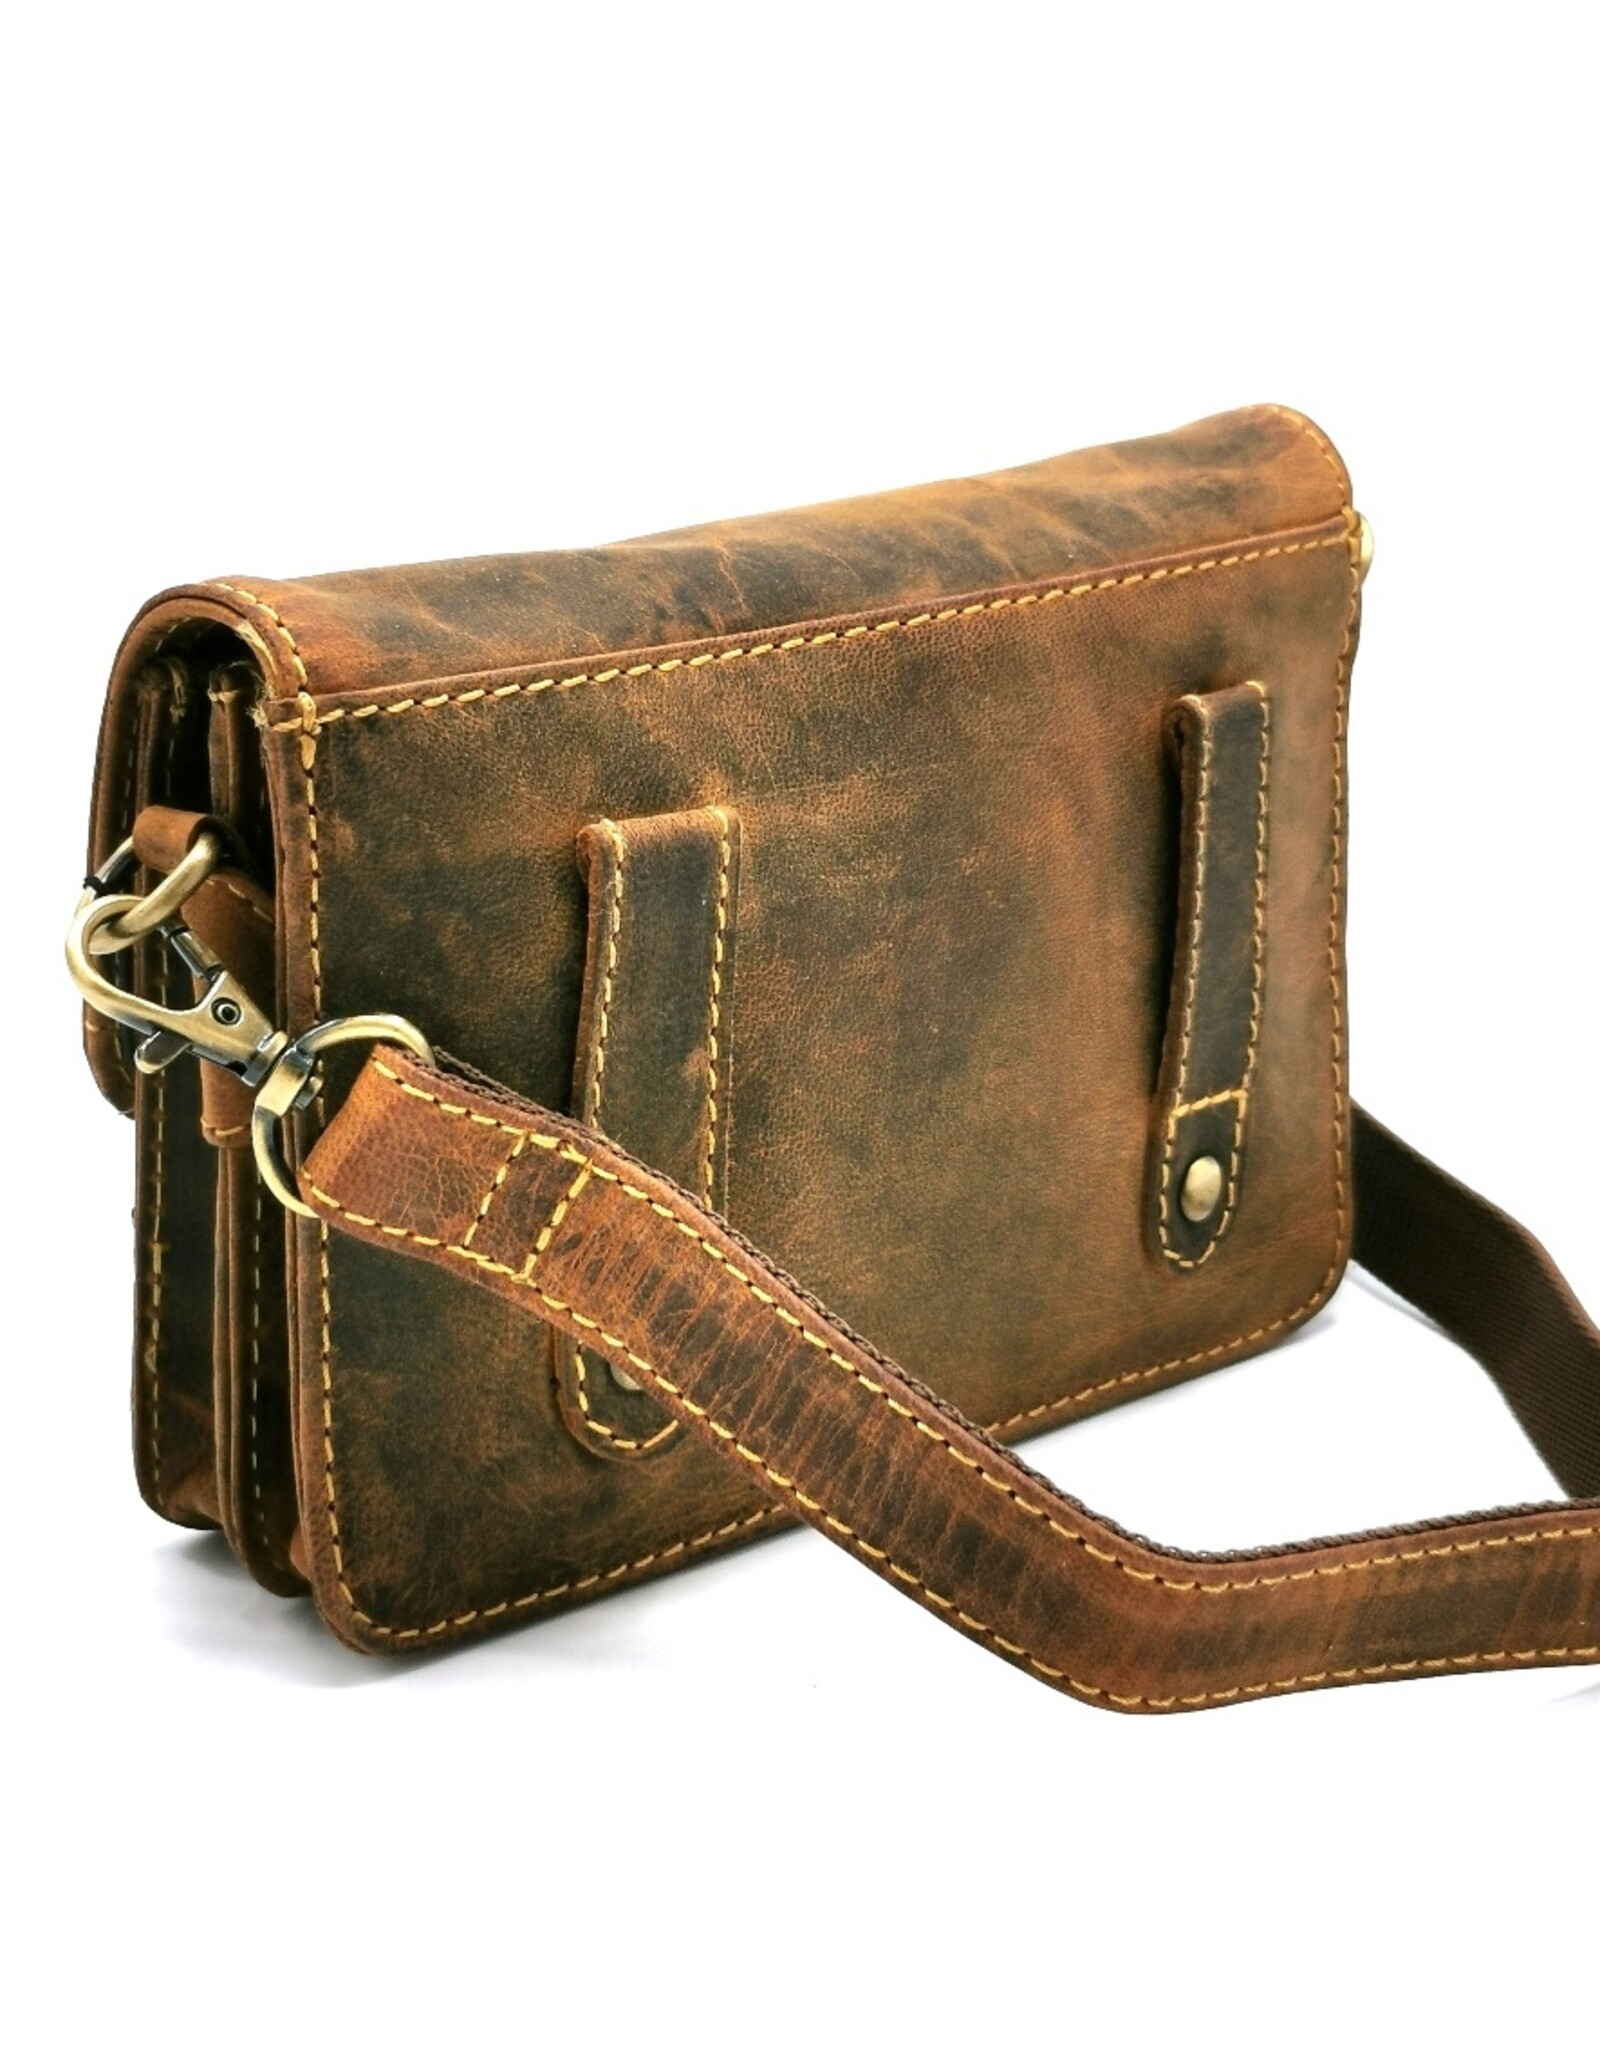 Hunters Leather Festival bags, waist bags and belt bags - Hunters Leather Shoulder Bag Vintage leather